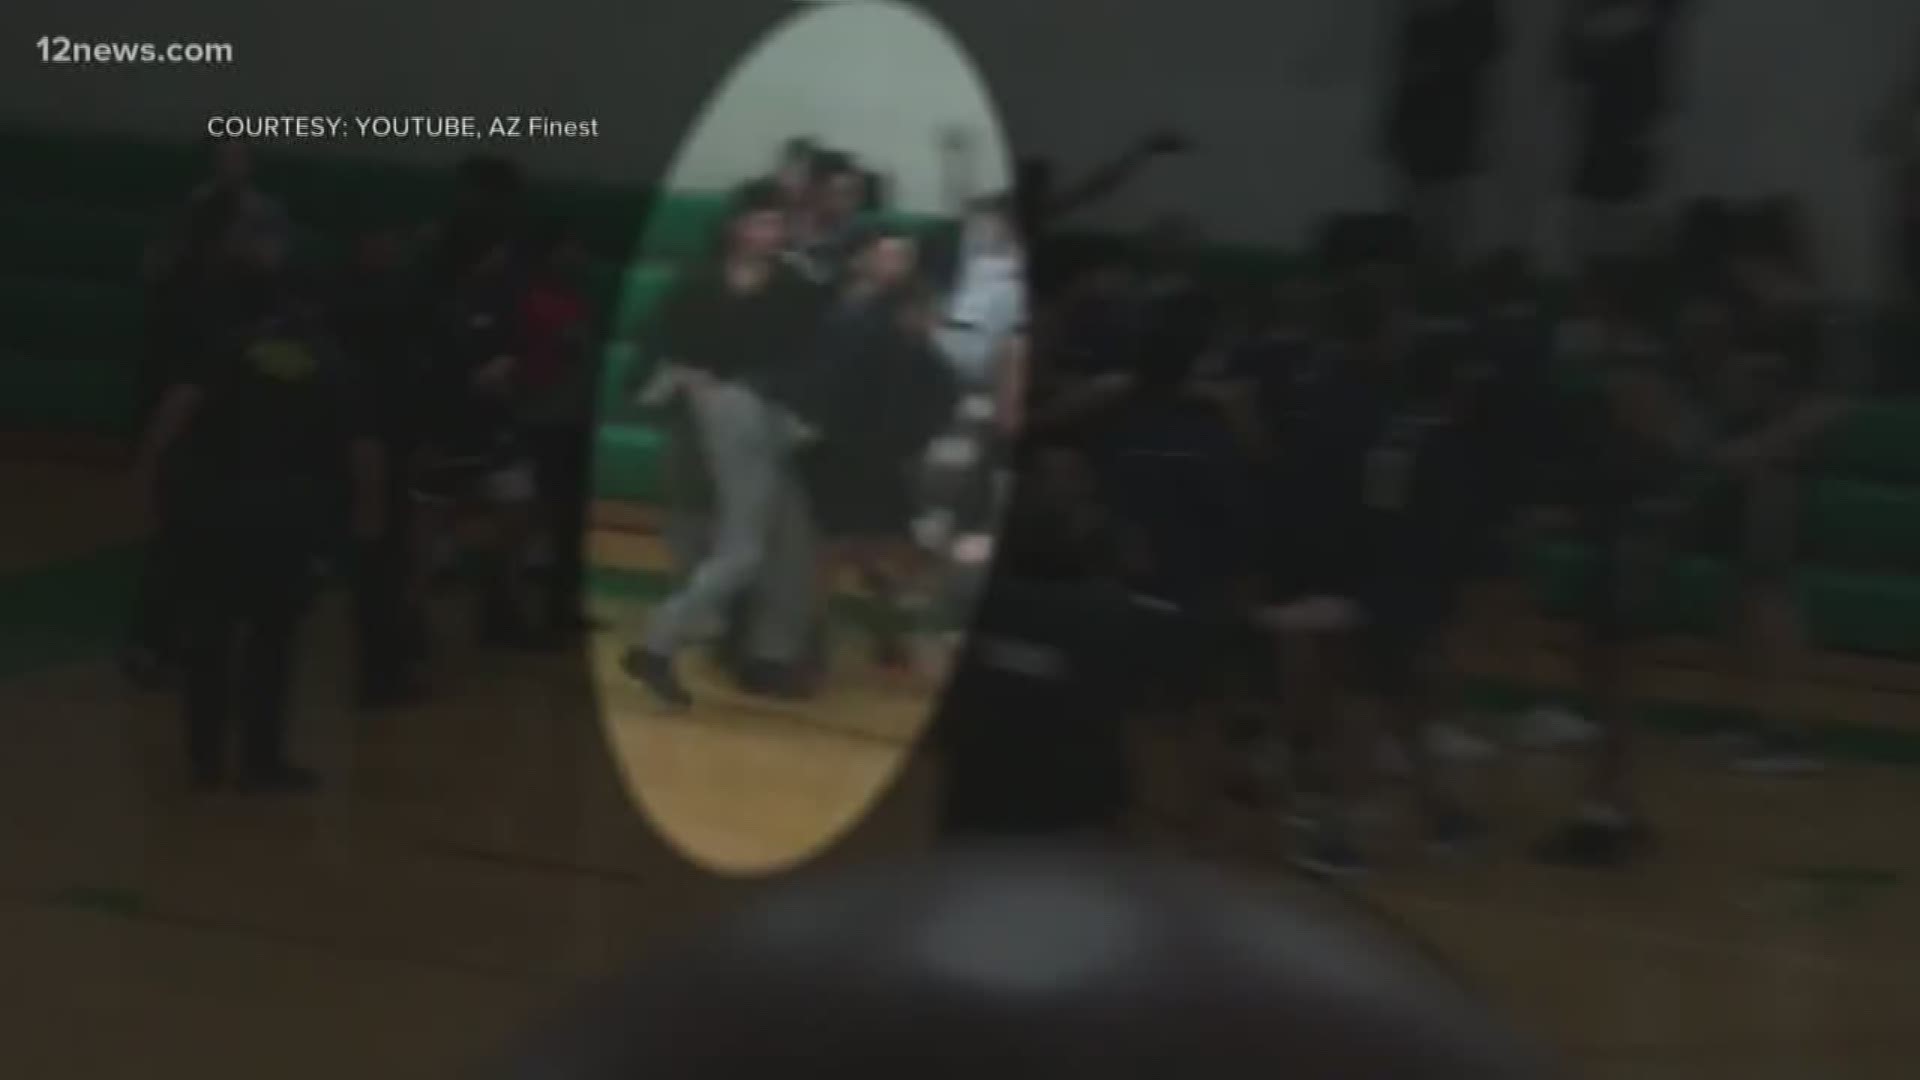 A Valley mom wants to make sure a high school coach keeps his job after he was caught on camera shoving and grabbing a basketball player